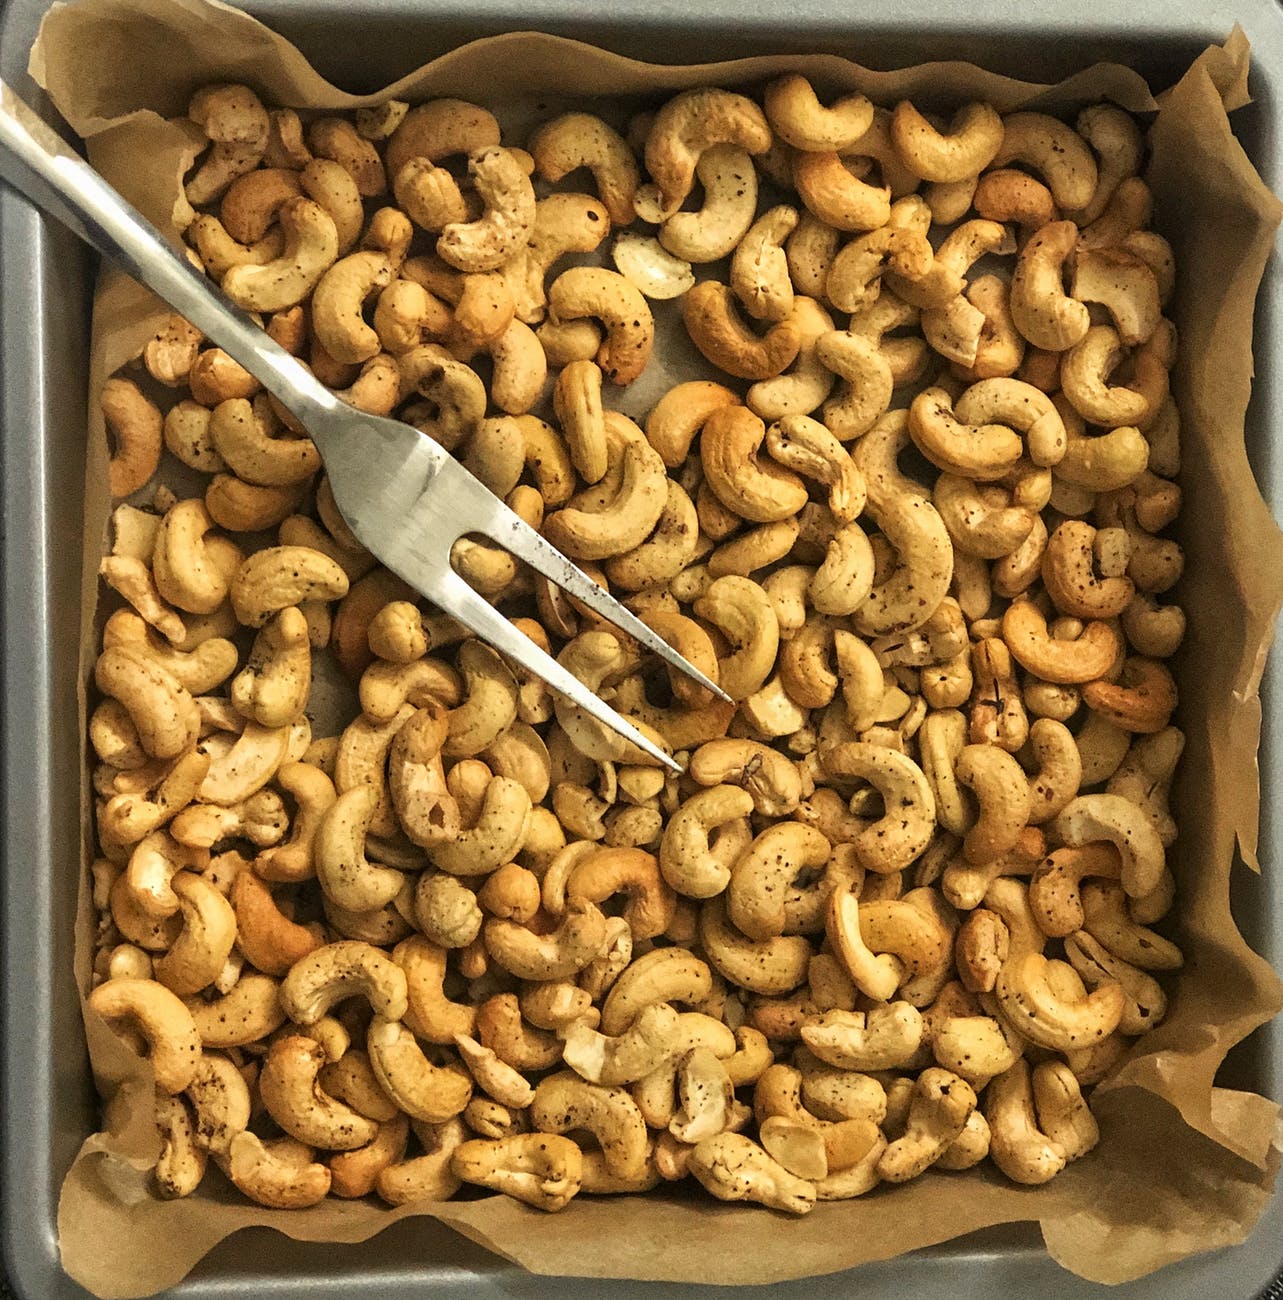 What are the dangers of feeding cashews to cats?